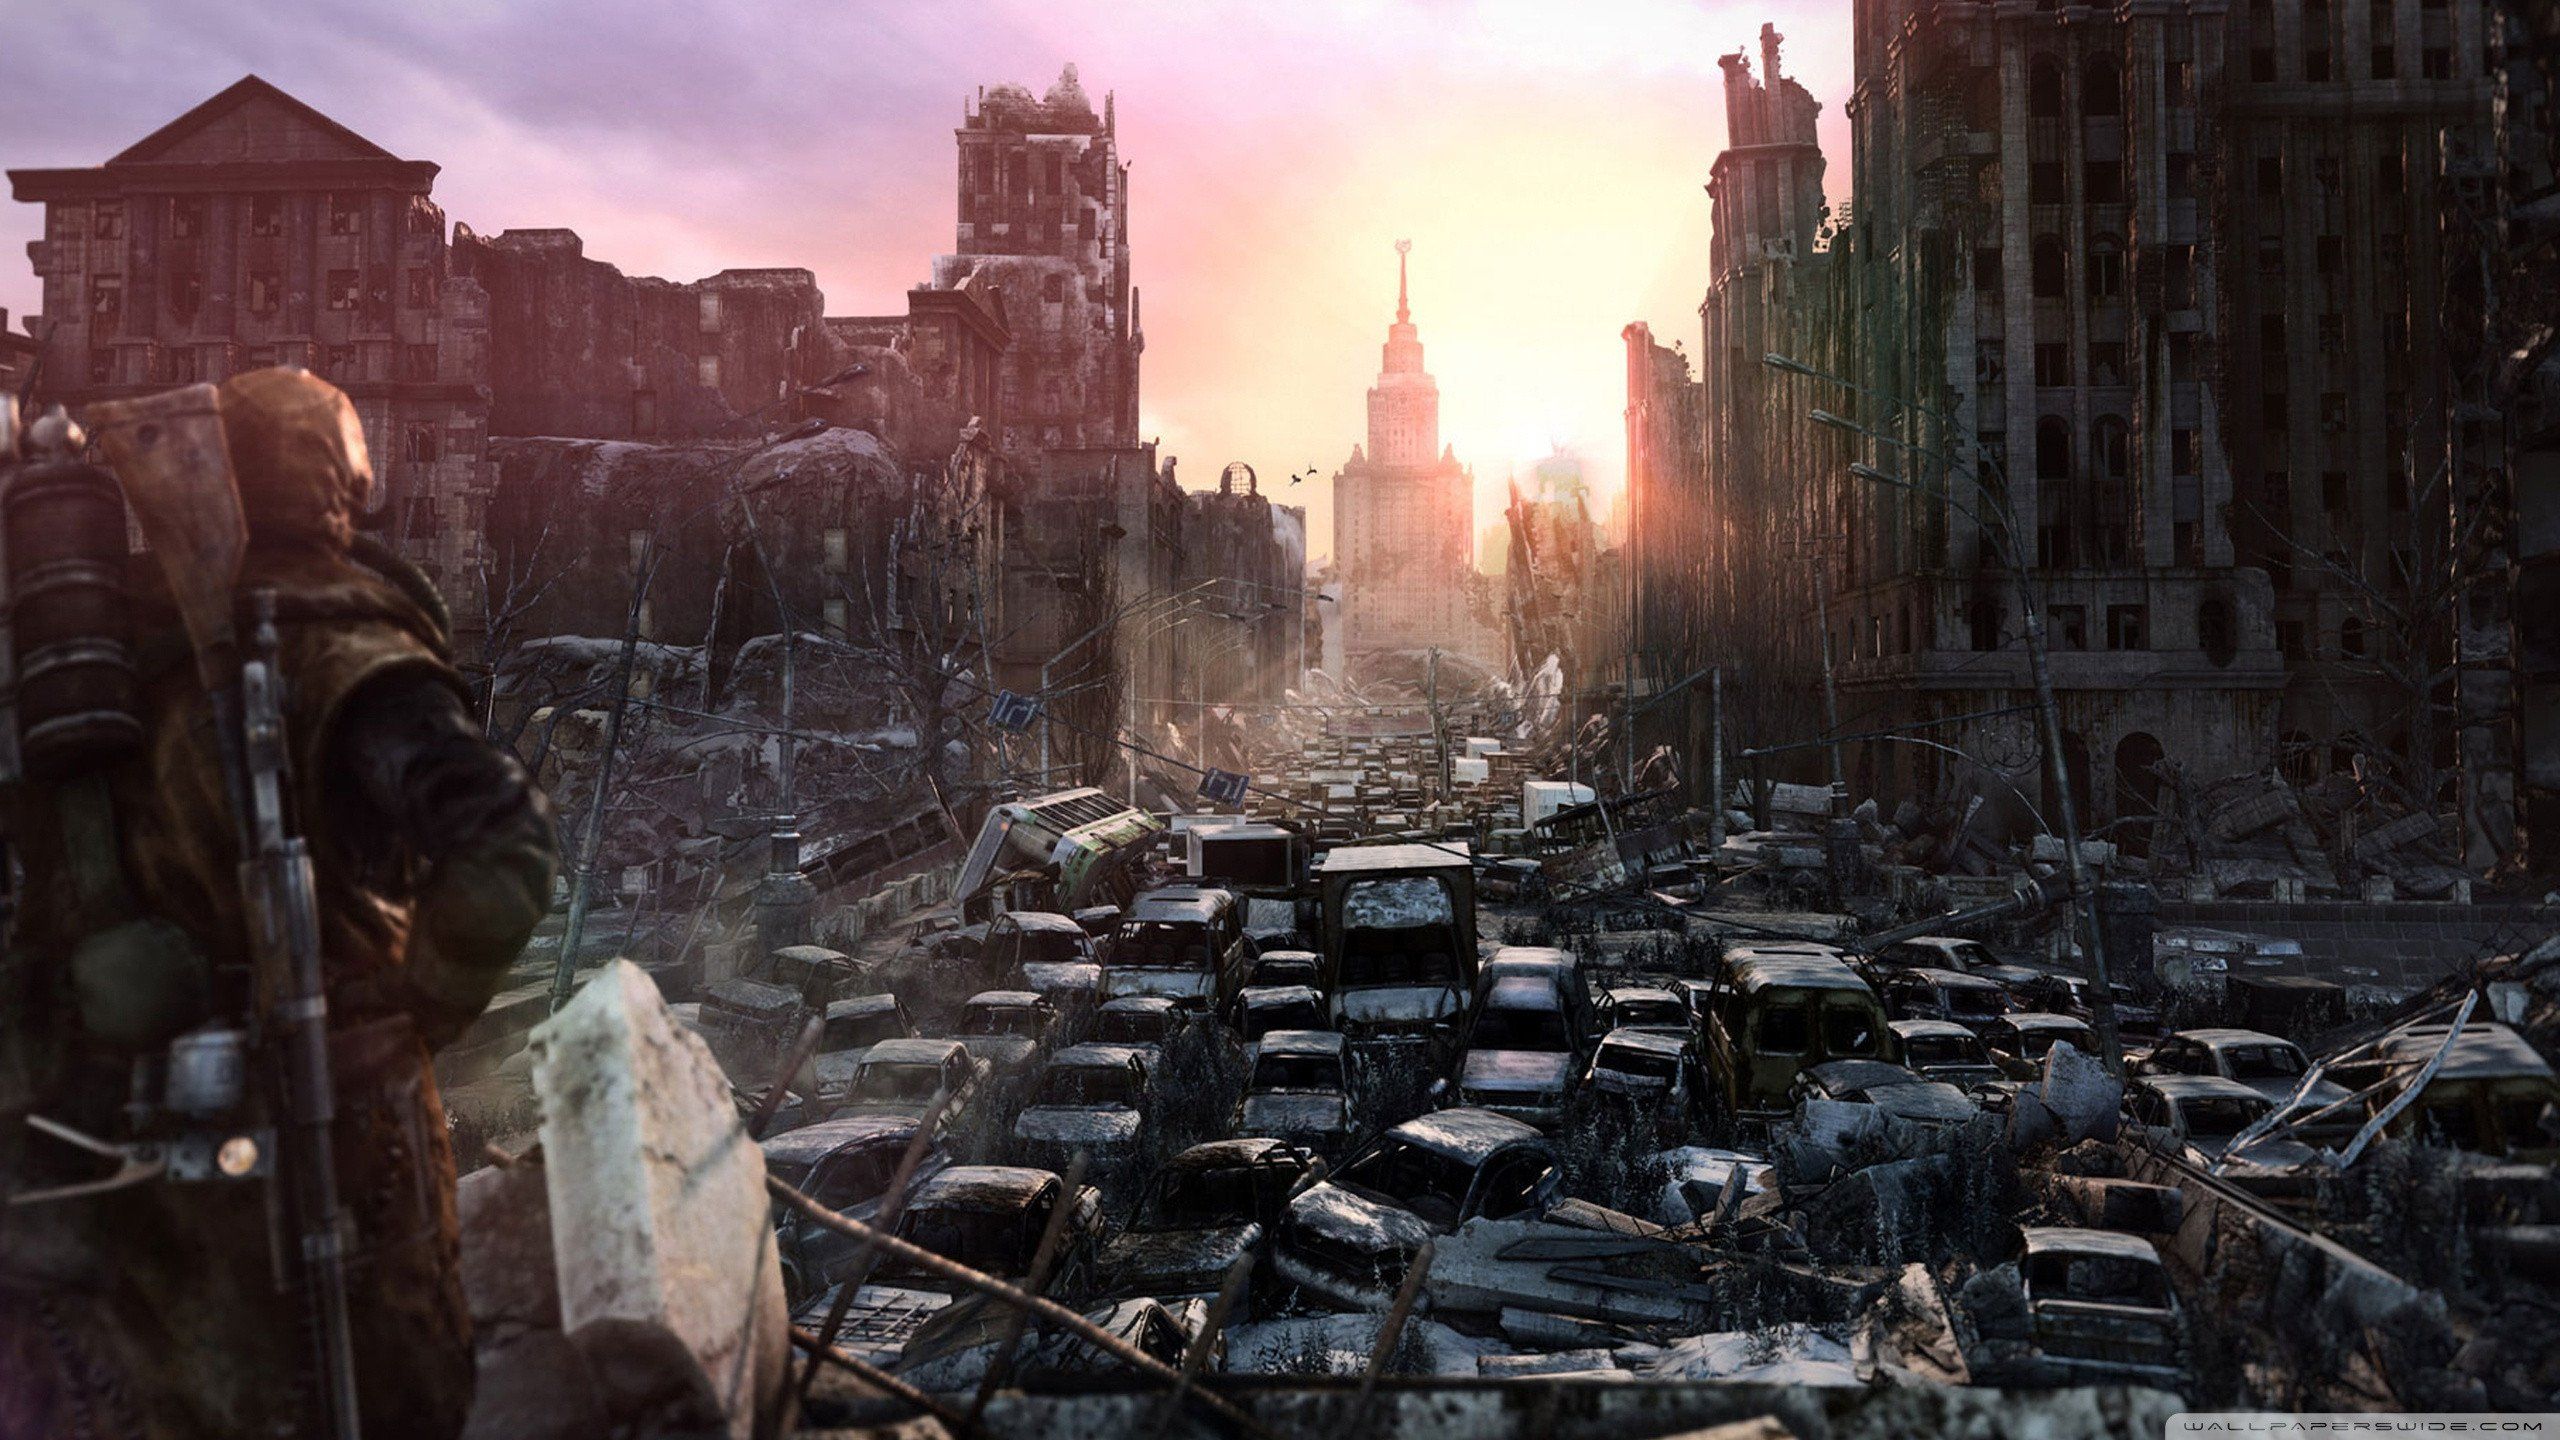 Apocalyptic 4K wallpaper for your desktop or mobile screen free and easy to download